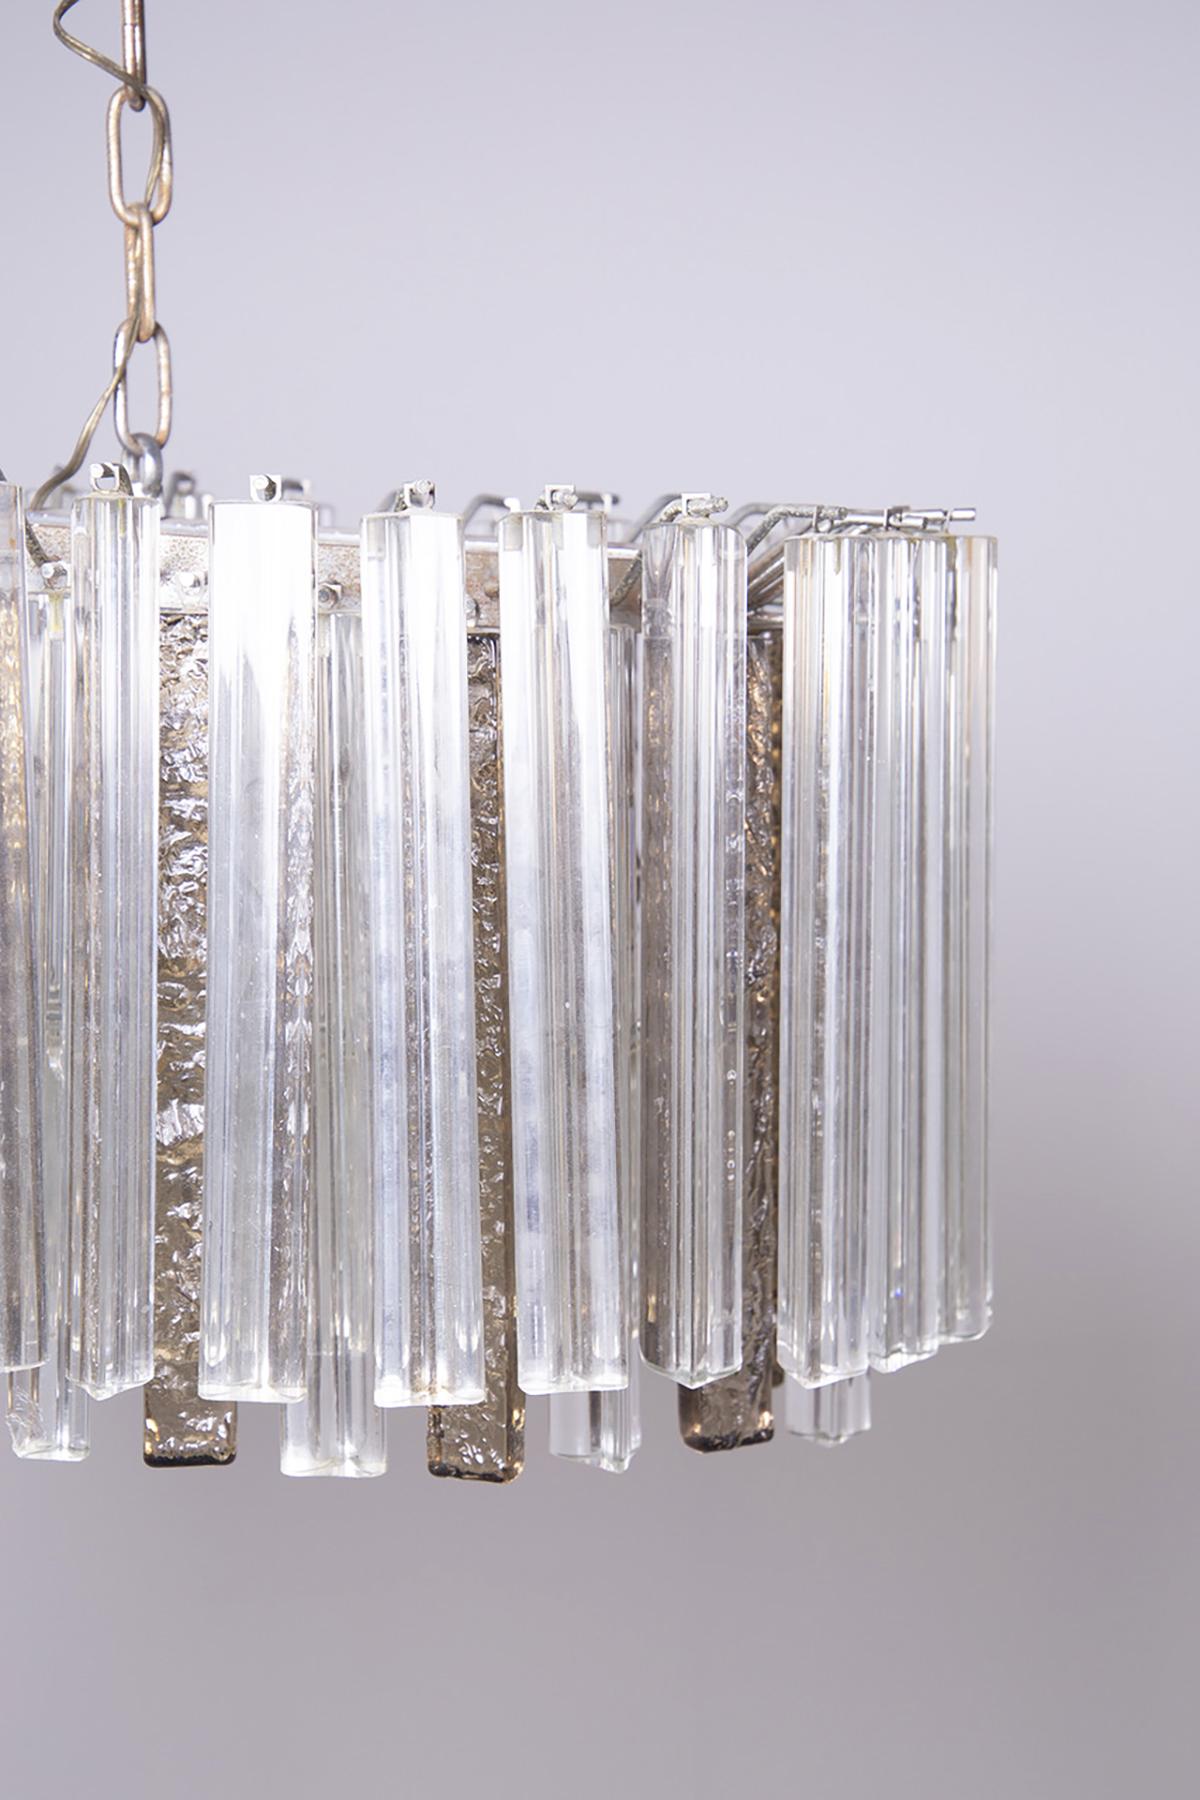 Beautiful chandelier made by Venini, steel structure and Murano glass stem in 1950.
The heavy chandelier is composed of small white and ivory Murano glass staves, respectively triangular-shaped white ones and rectangular-shaped ivory ones, also the